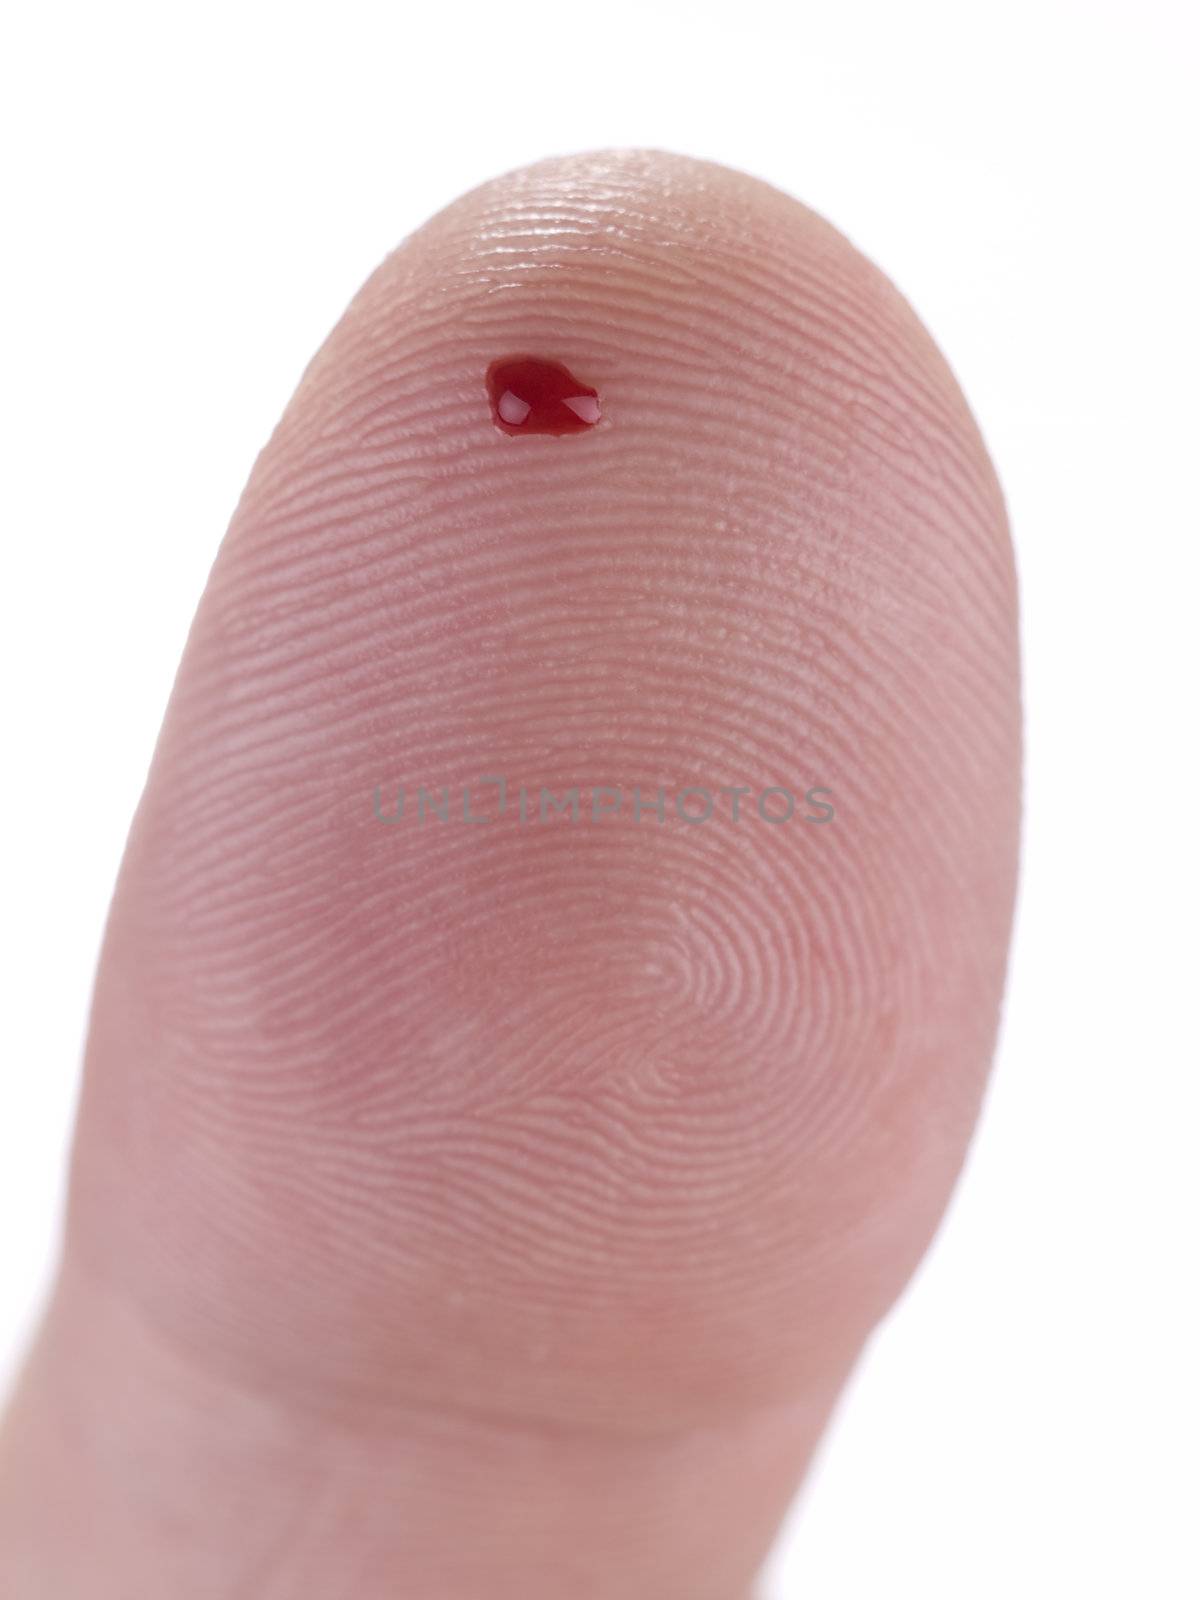 Macro view of a drop of real blood on a human thumb.